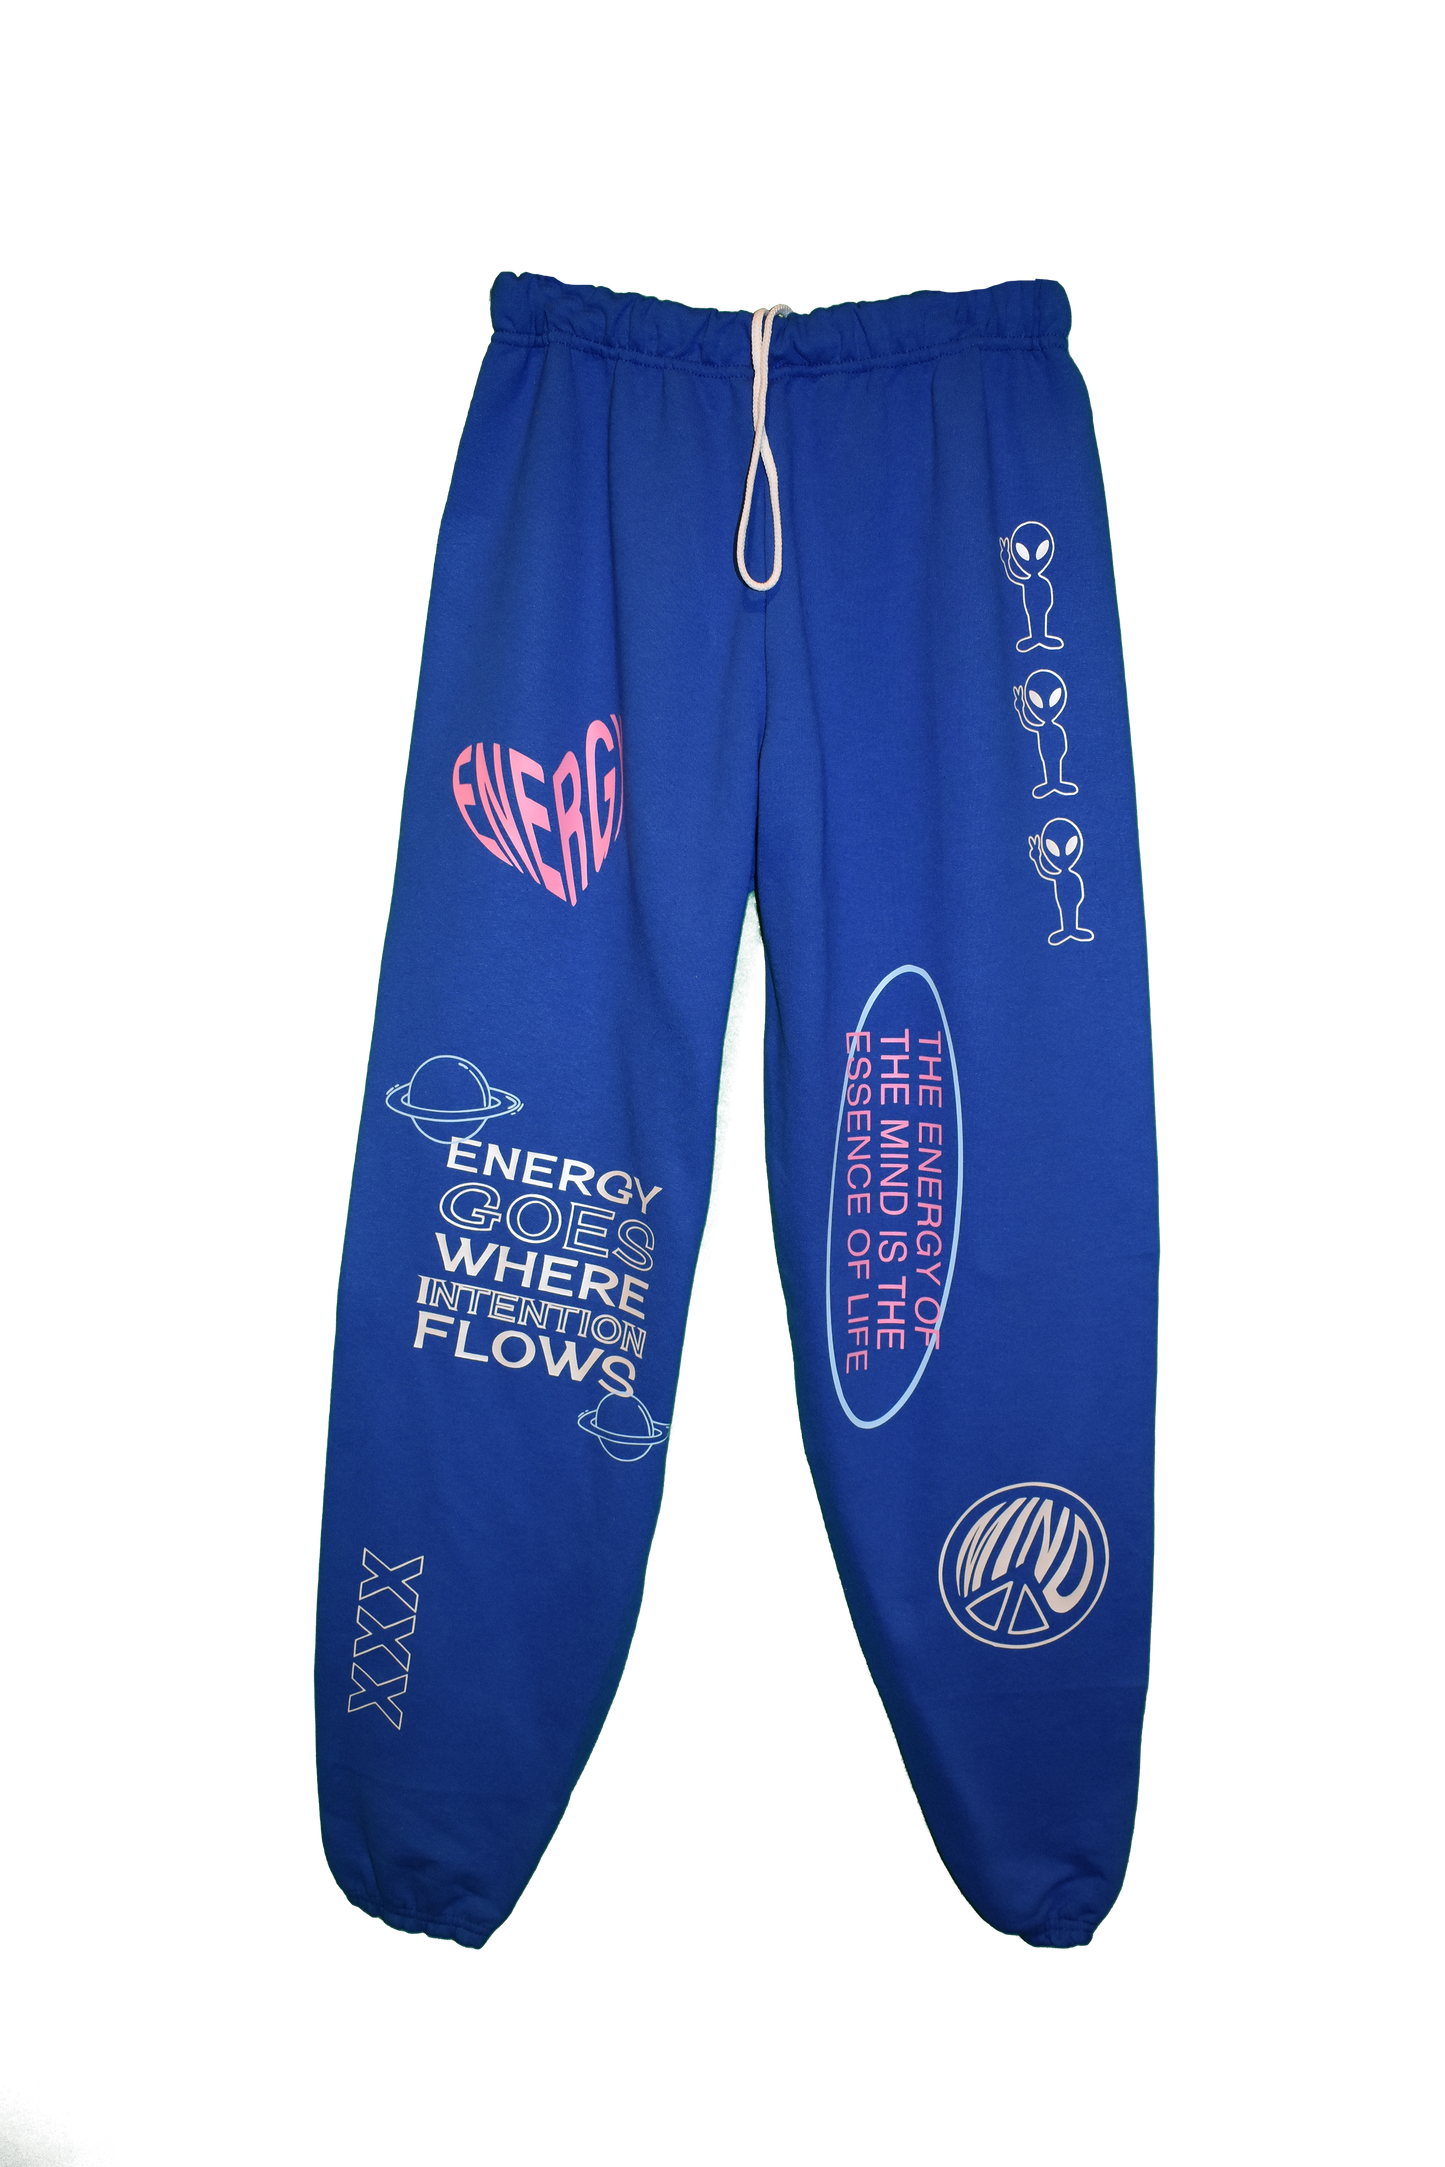 blue energy sweatpants. Energy goes where intention flows. The energy of the mind is the essence of life.